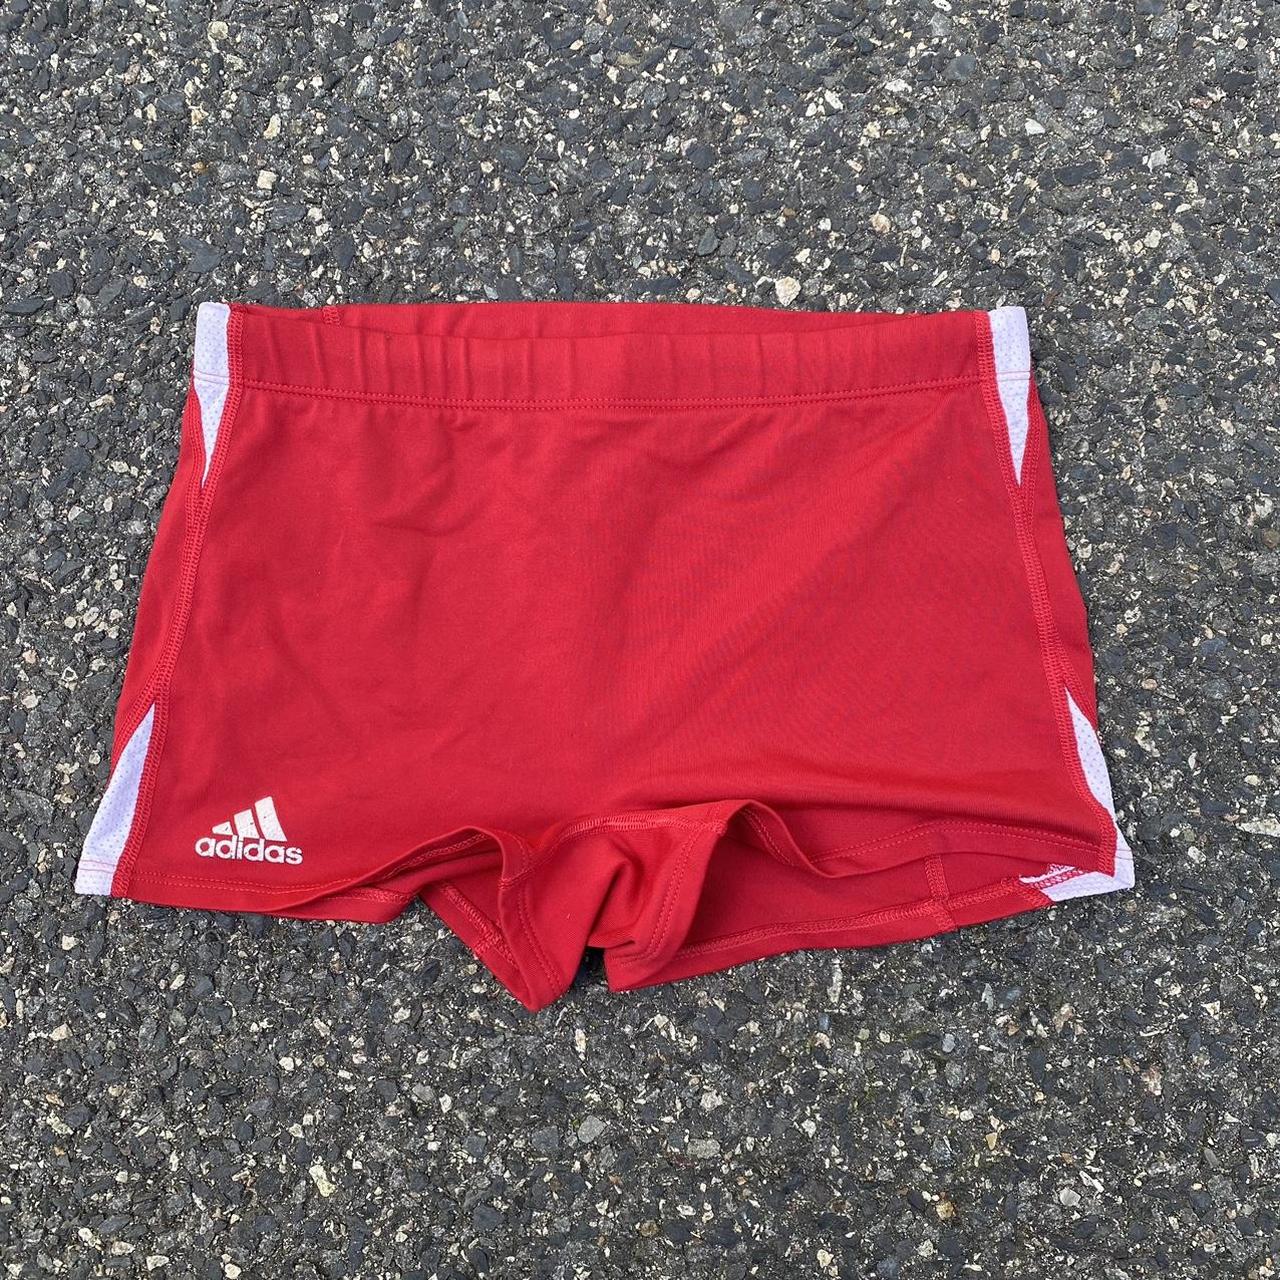 Adidas Women's Red and White Shorts